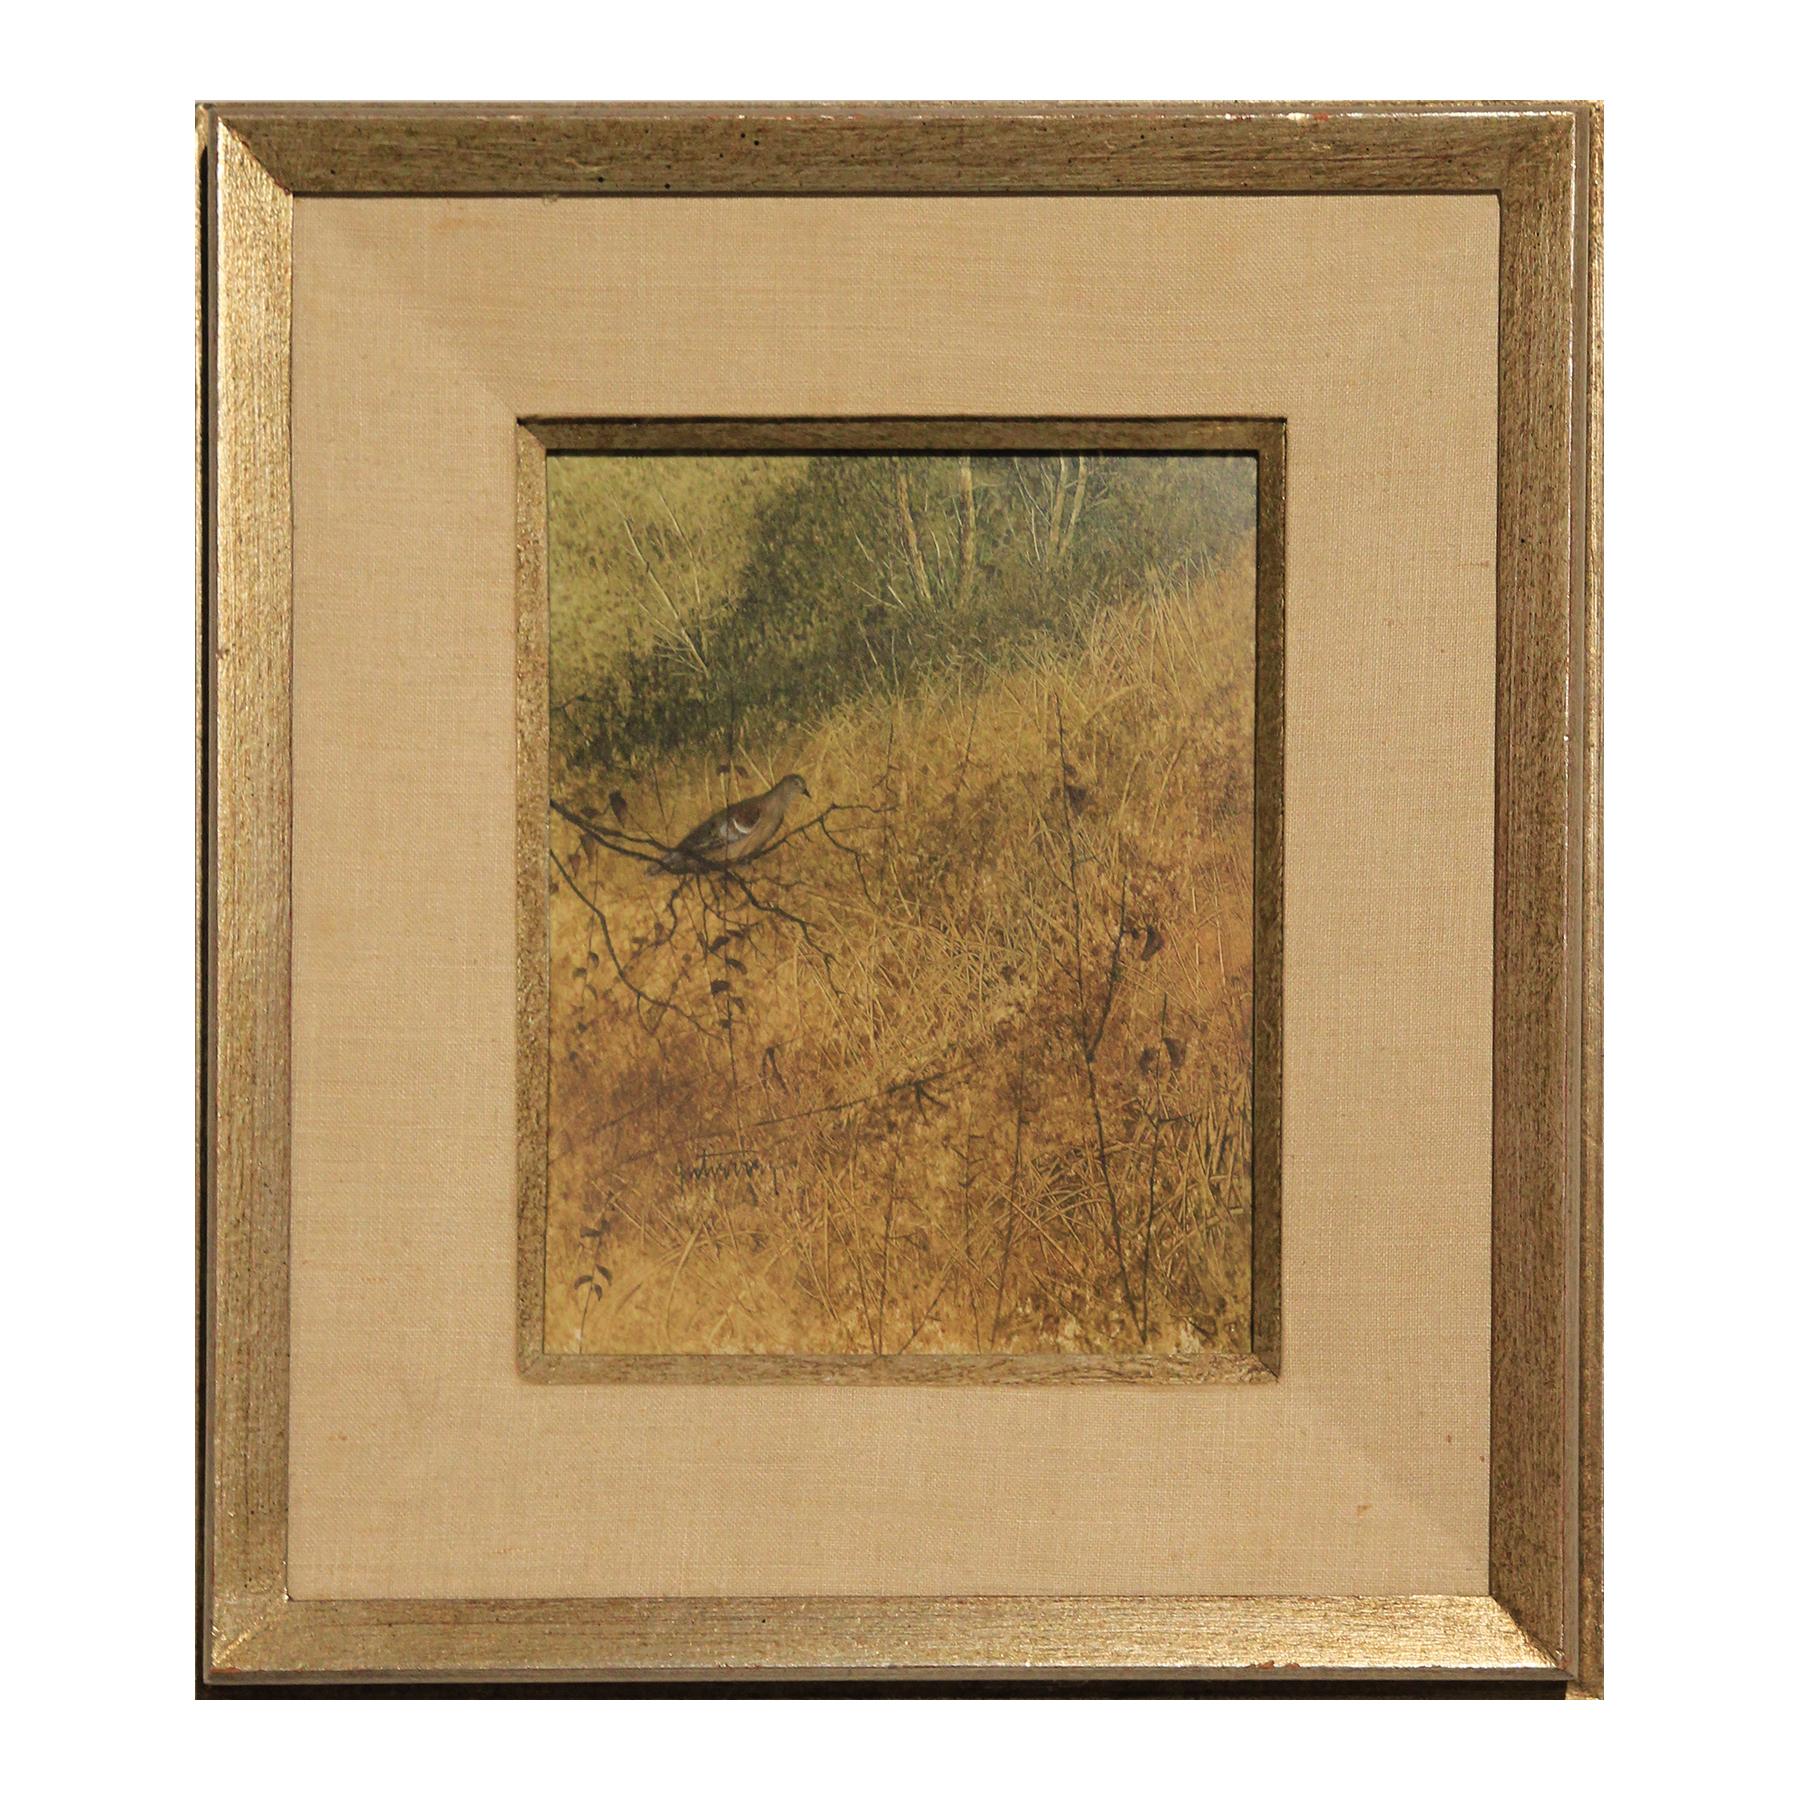 Raul Gutierrez Landscape Painting - Naturalistic Earth Toned Rural Texas Landscape Oil Painting of a Bird